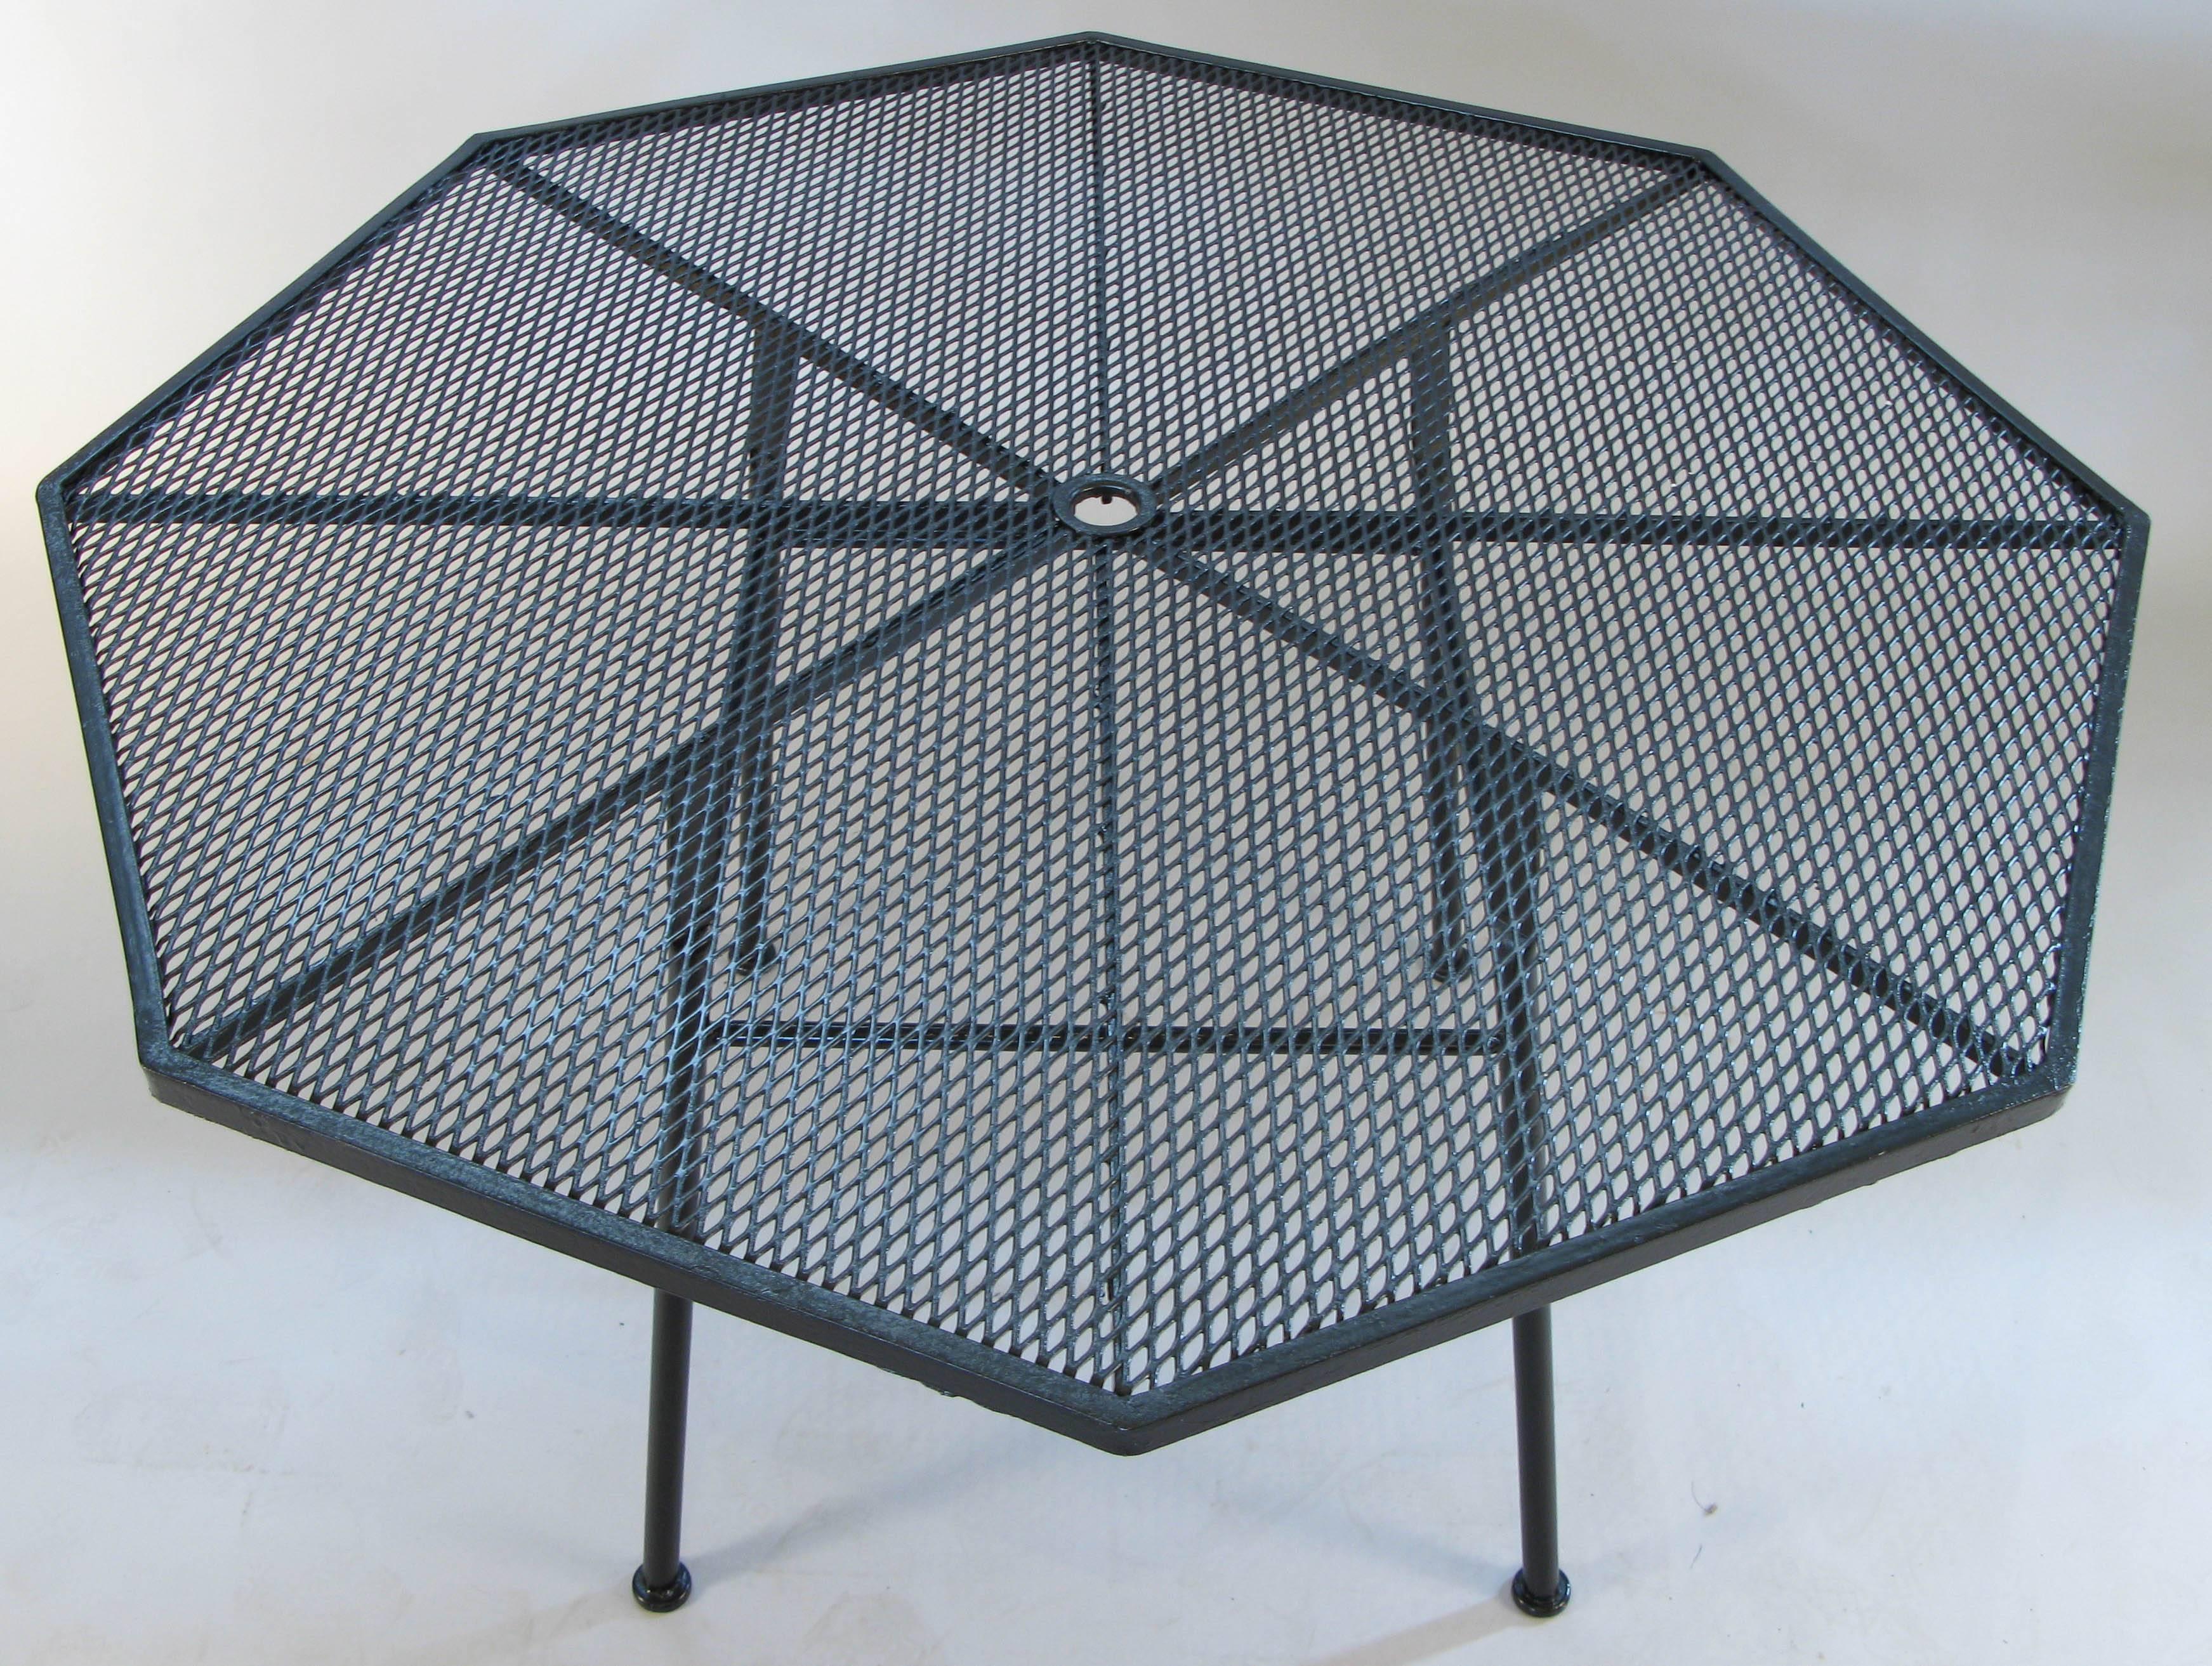 A 1950s octagonal dining table by Russell Woodard in wrought iron and steel mesh from his 1950s Sculptura collection. wonderful design and very nice proportions -- freshly refinished in satin black, or can also be finished in a color of choice.